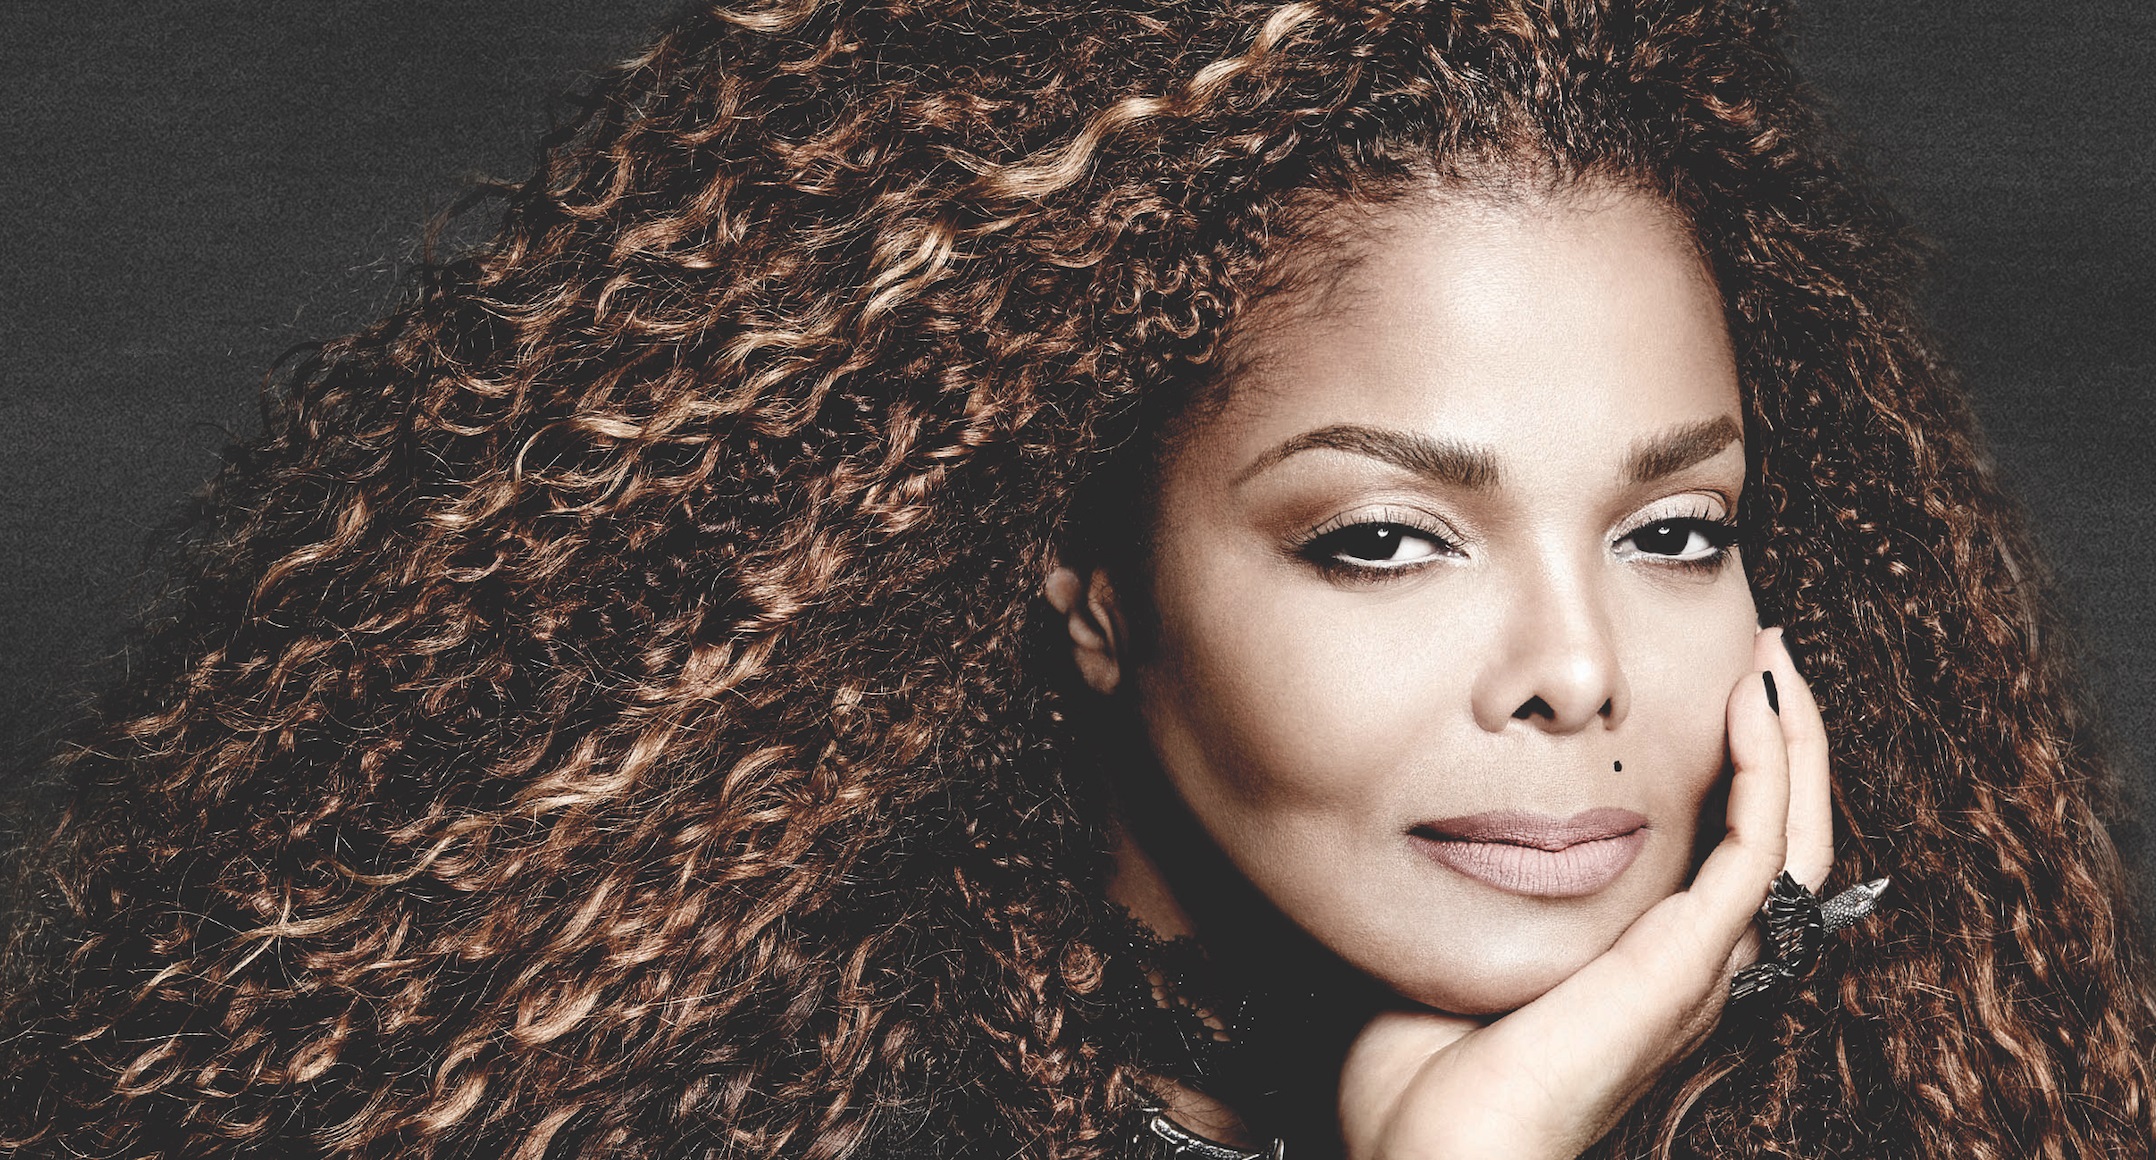 She’s Coming! Janet Jackson is Readying Brand New Studio Album!